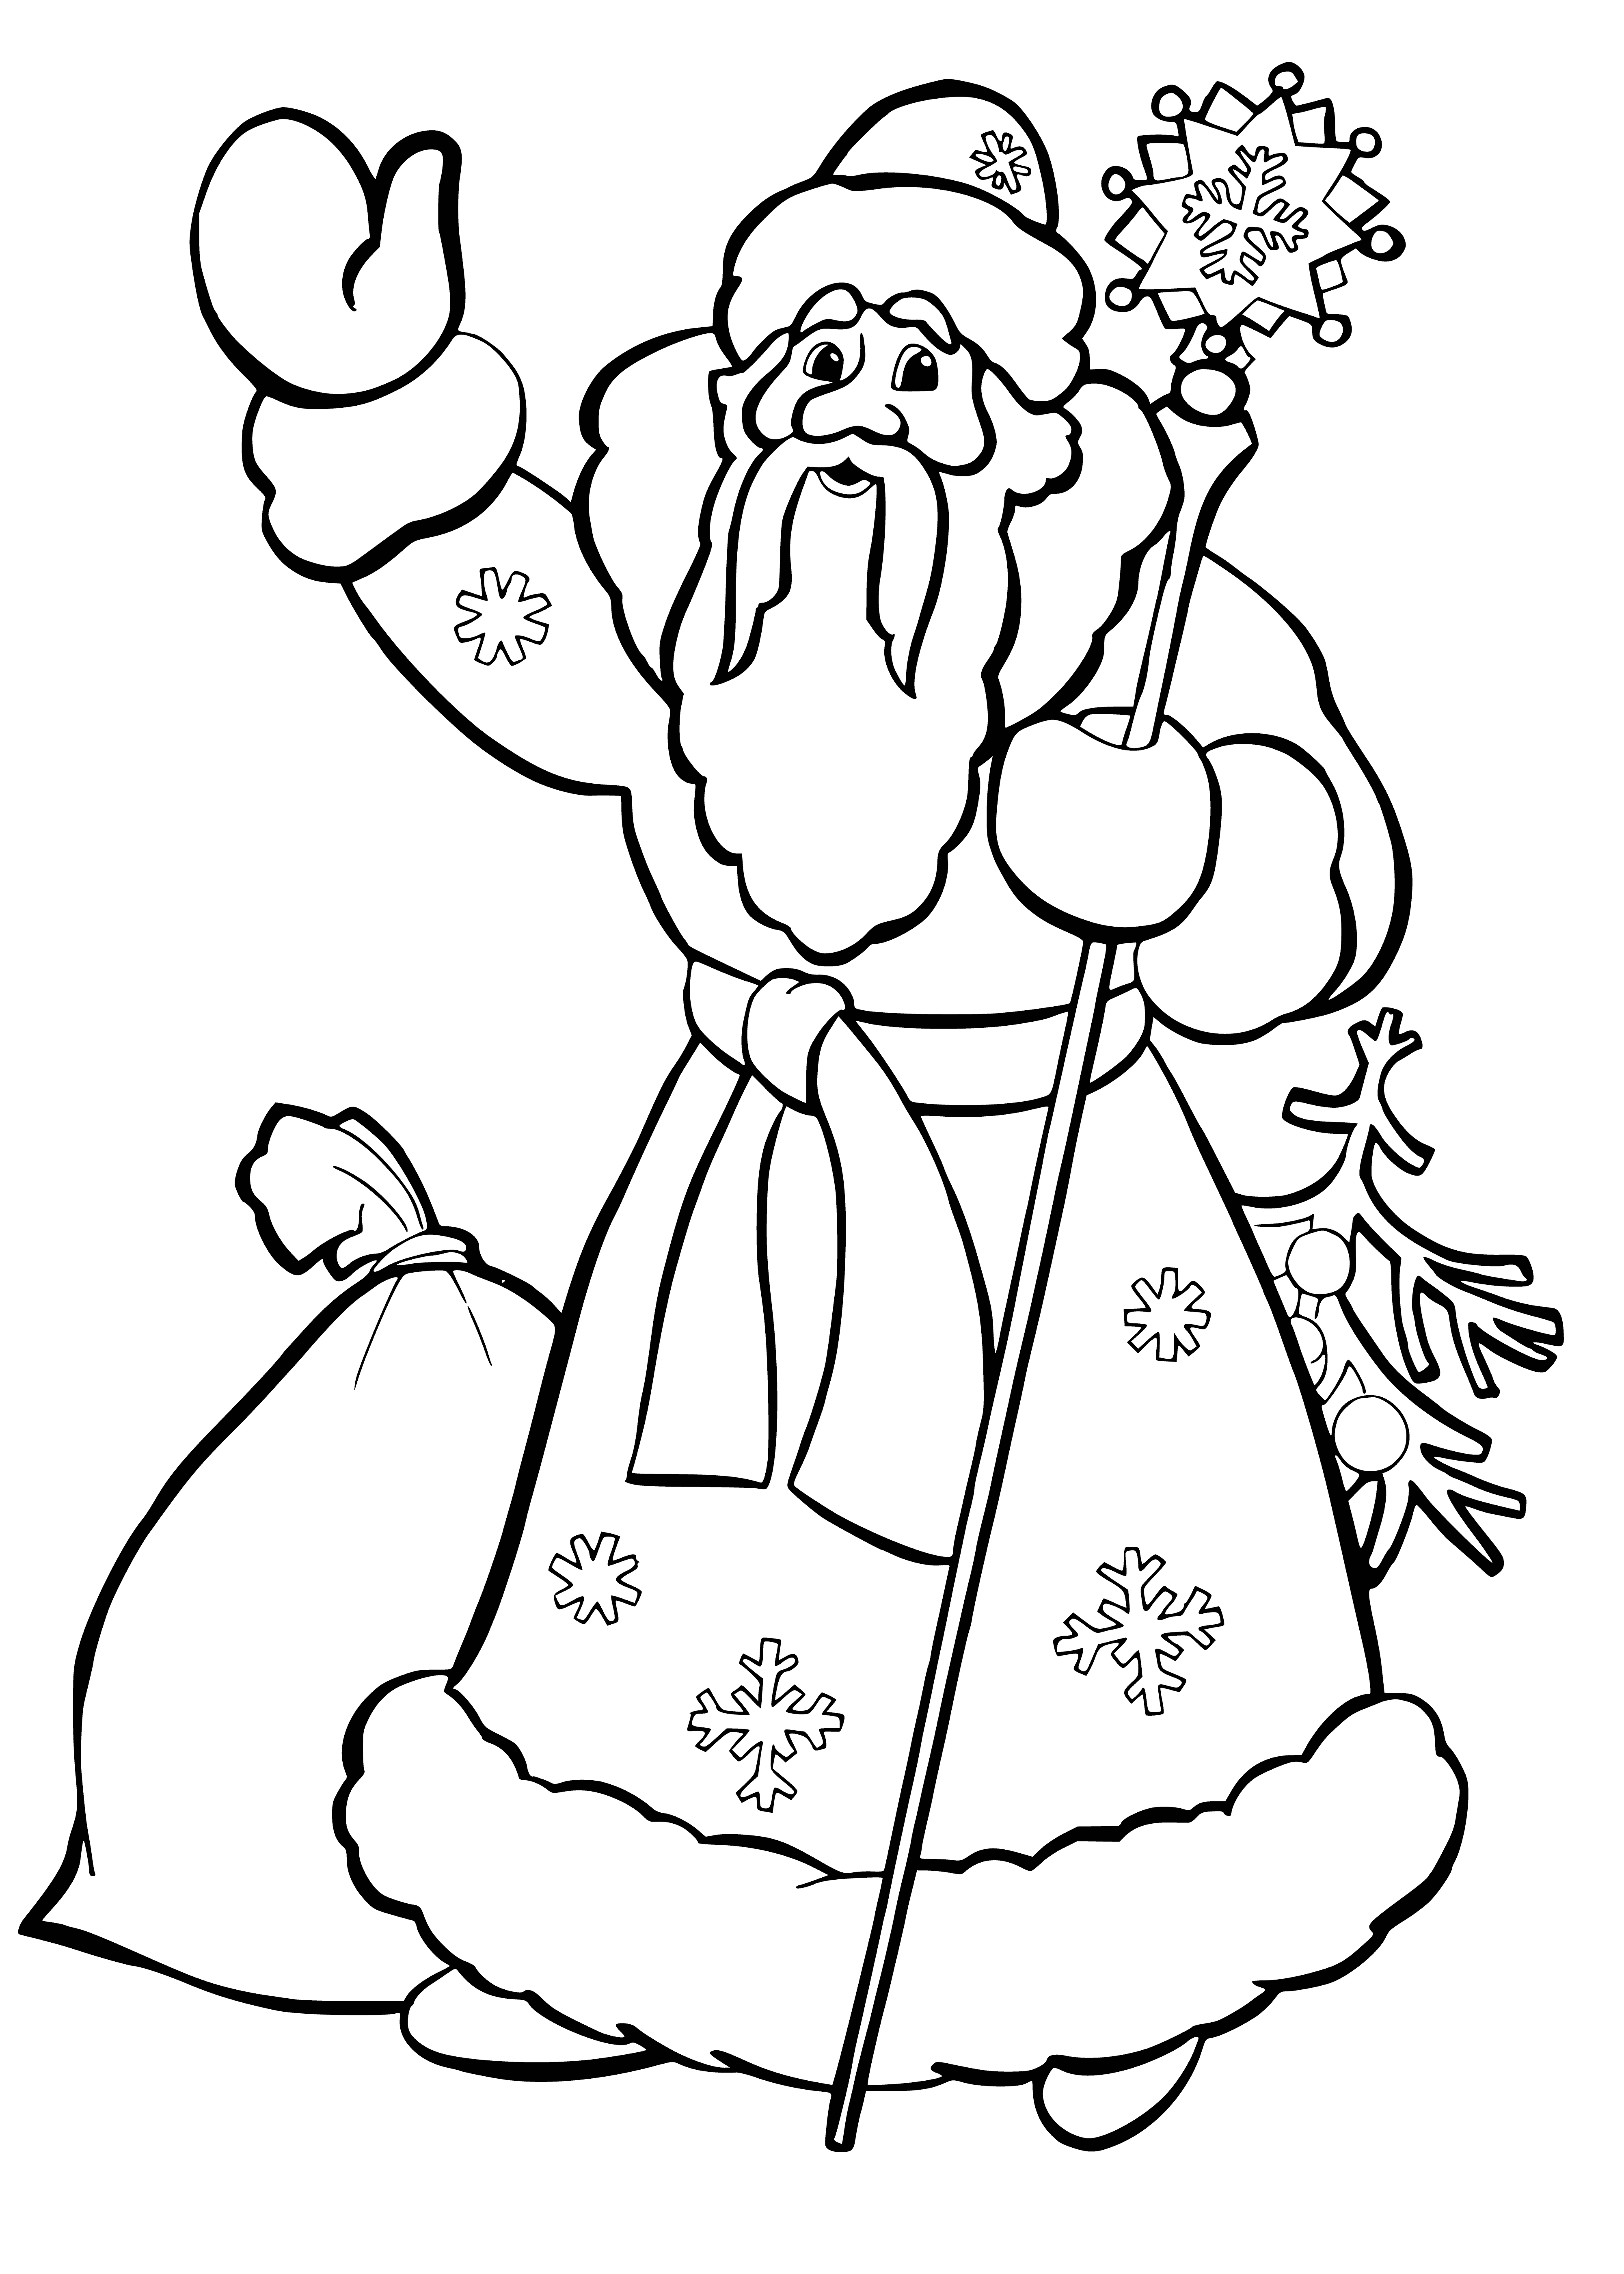 coloring page: Jolly man in red suit, white fur trim, long white beard, rosy cheeks, twinkly eyes, overflowing sack of presents - Santa!